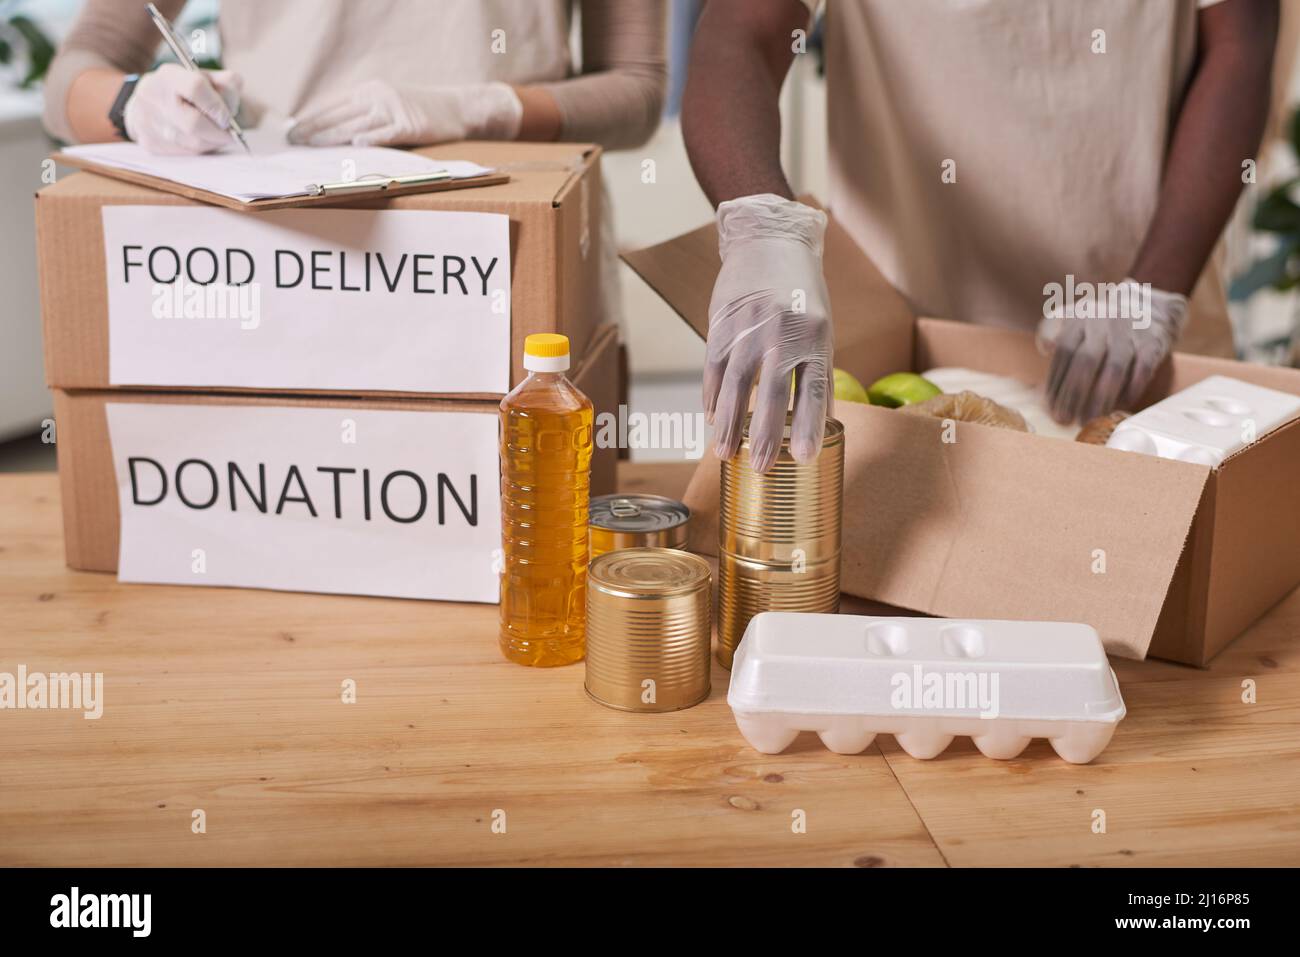 Medium section shot of unrecognizable man and woman wearing latex gloves packing food supplies for donation Stock Photo